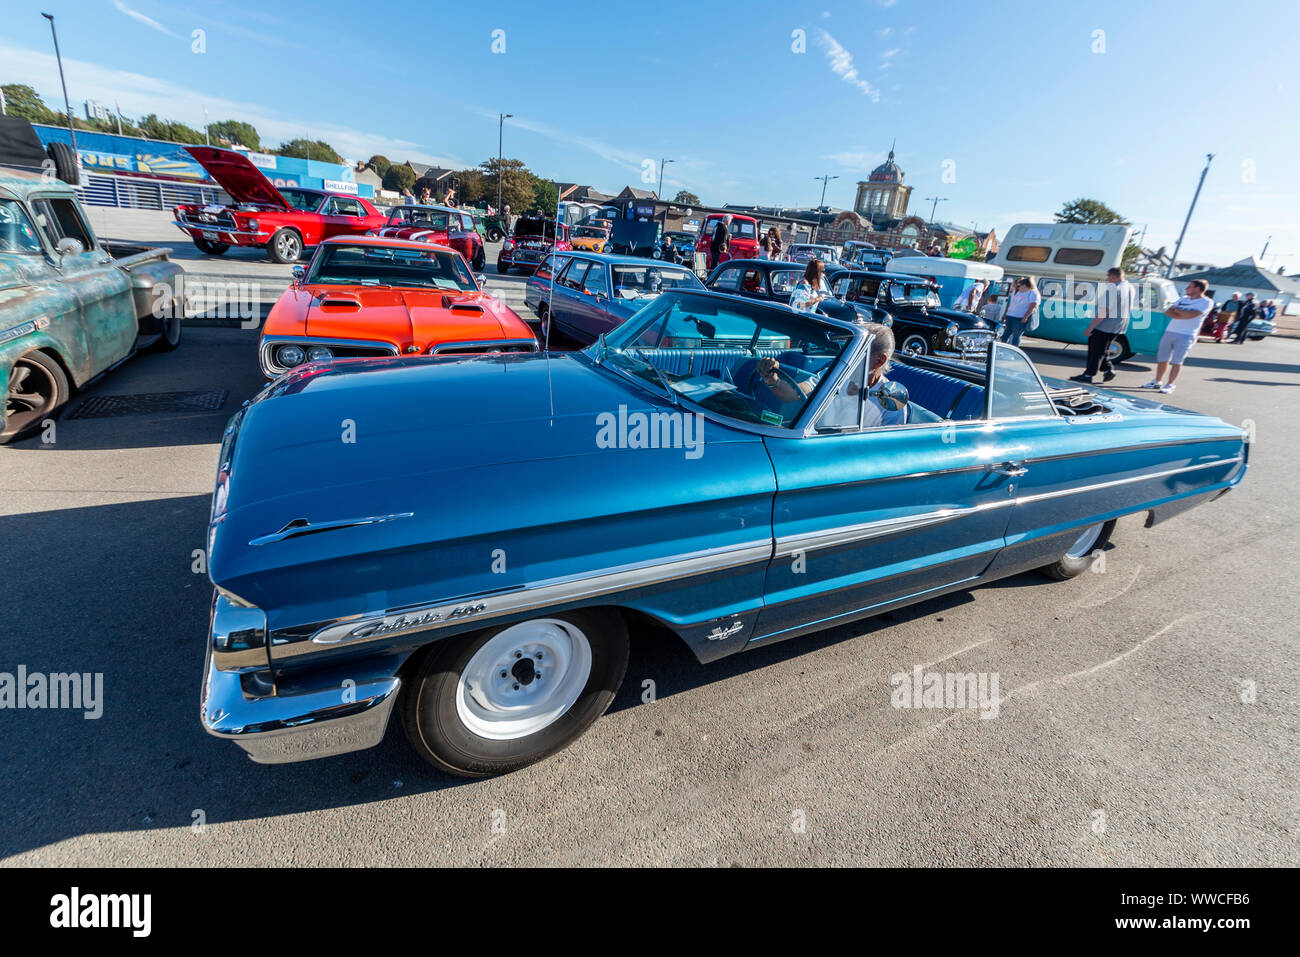 Classic and vintage cars have headed along the seafront of the seaside town to take part in a 'show 'n' shine' event at City Beach on Marine Parade in Southend on Sea, Essex. The UK weather has dawned bright, warm and sunny. Ford Galaxie 500 Stock Photo